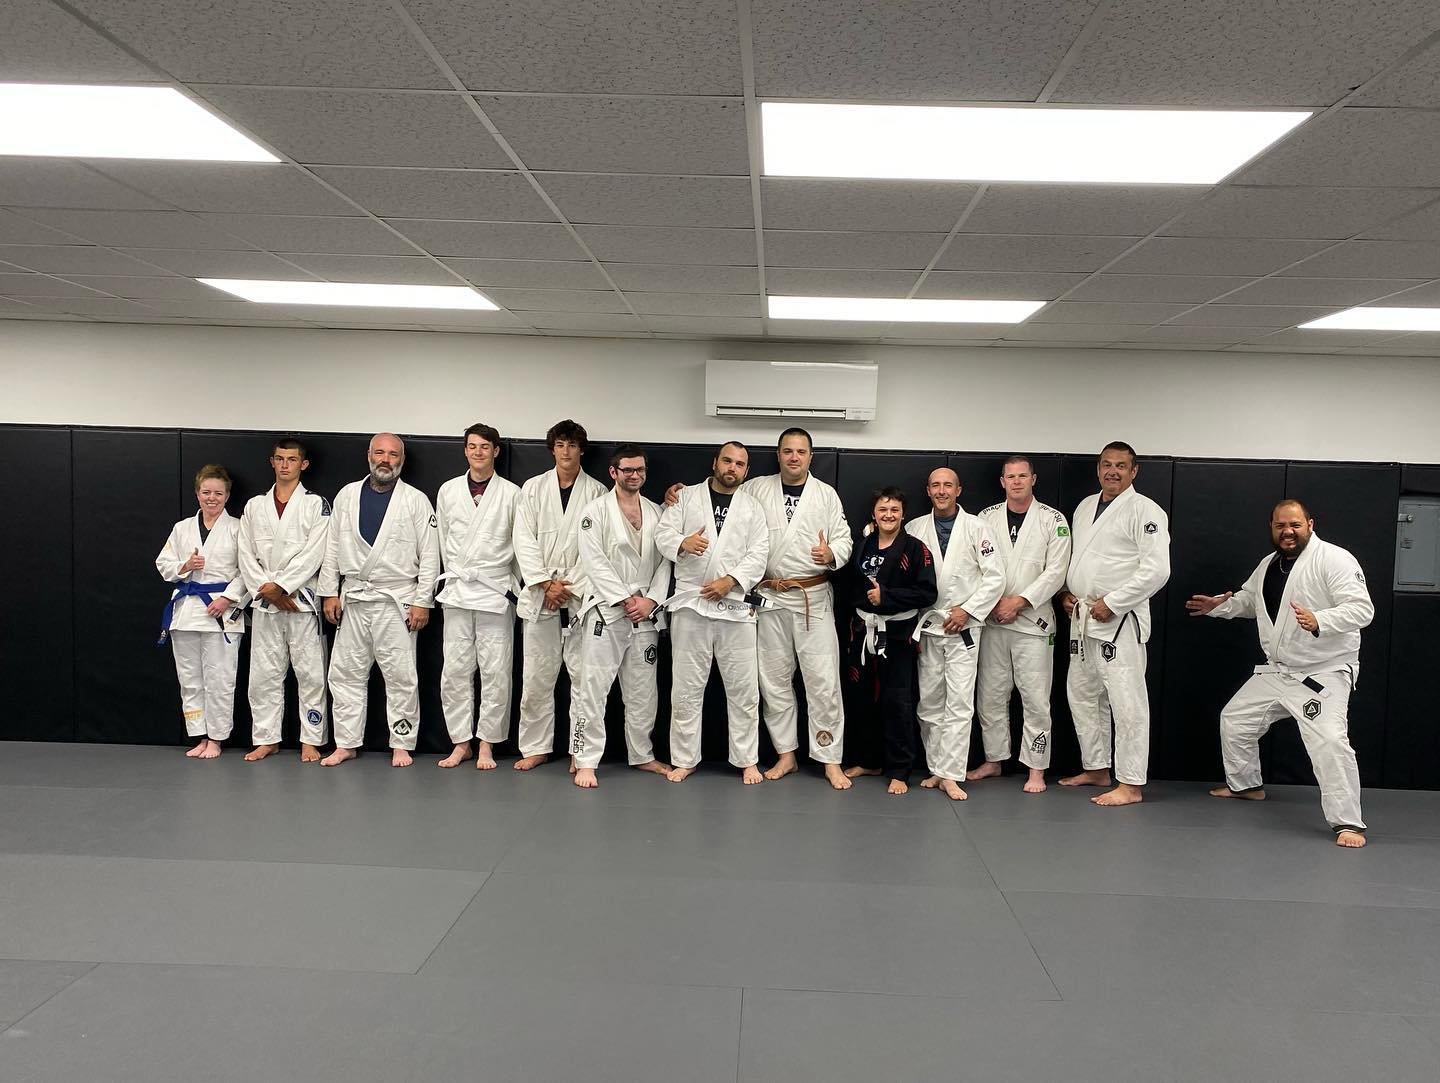 Stripes, stripes, and more stripes! Congratulations to Scott on earning his first Gracie Combatives strips. Scott came to us last year an already established Jiu Jitsu student and has been a great addition to the team! He has a great attitude and kno